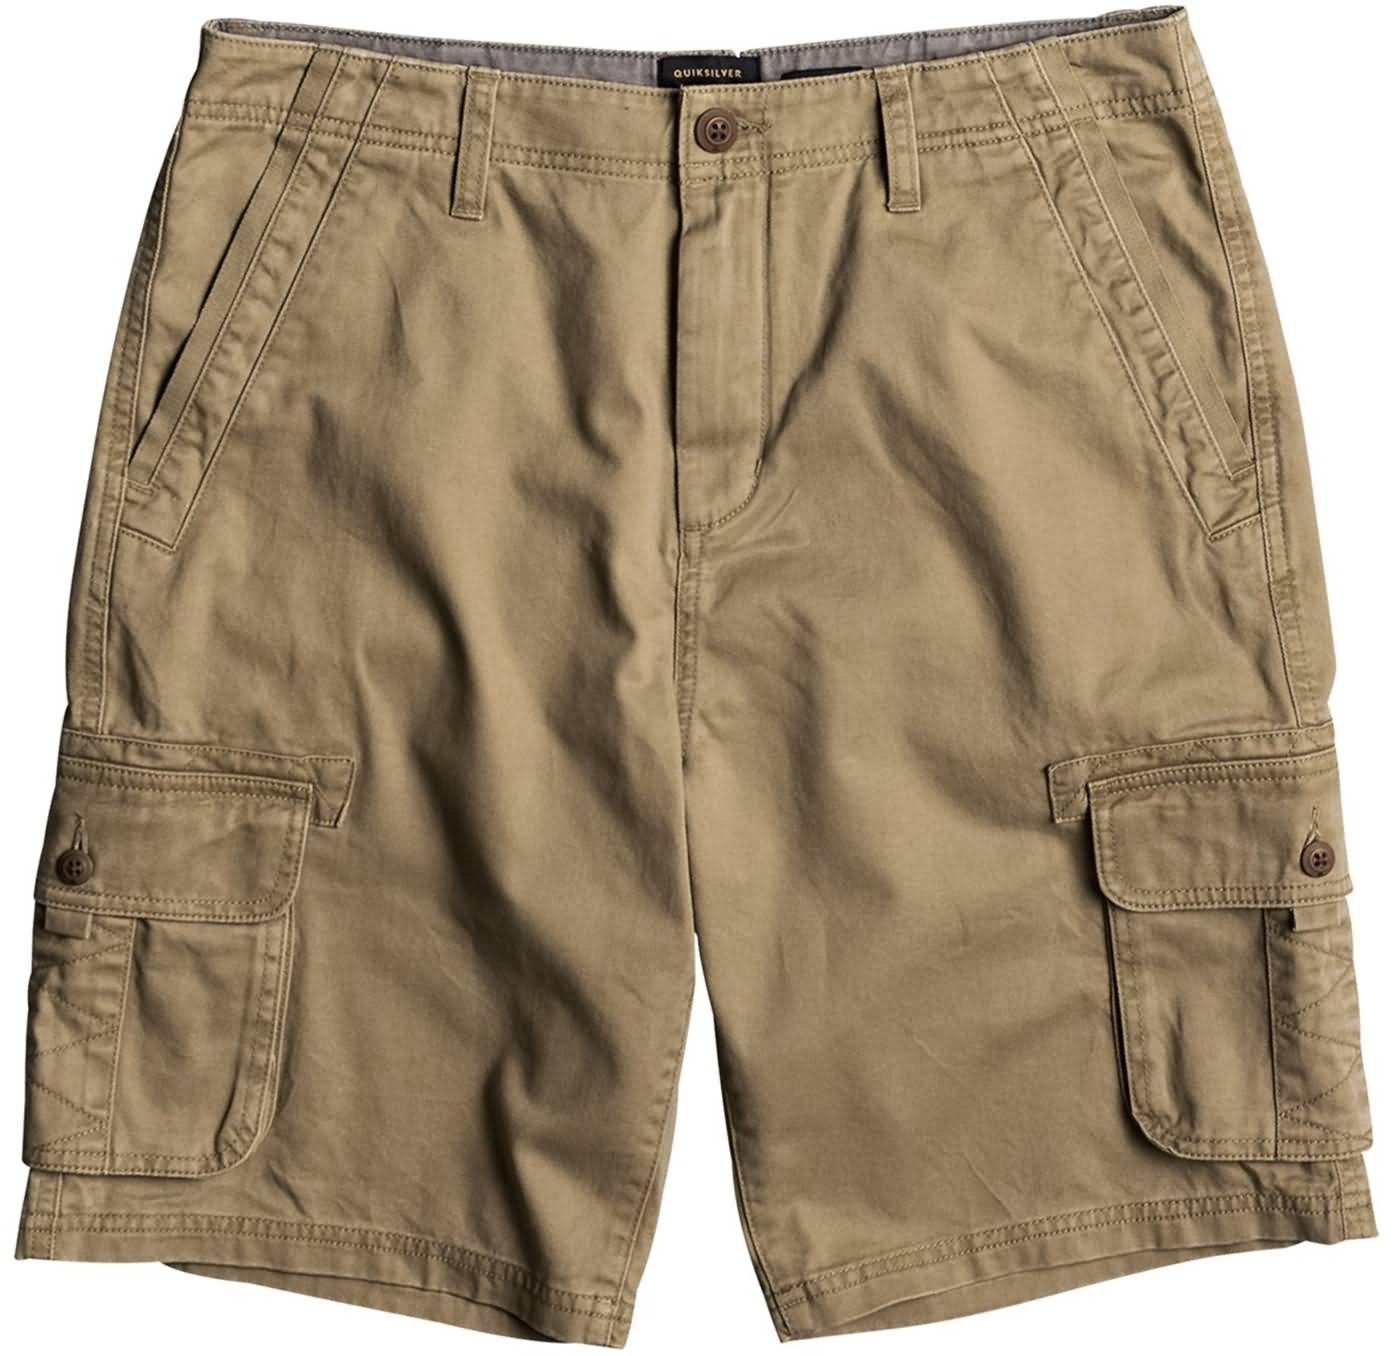 Quiksilver Surf Fall 2017 Mens Lifestyle Beach Walkshorts Preview